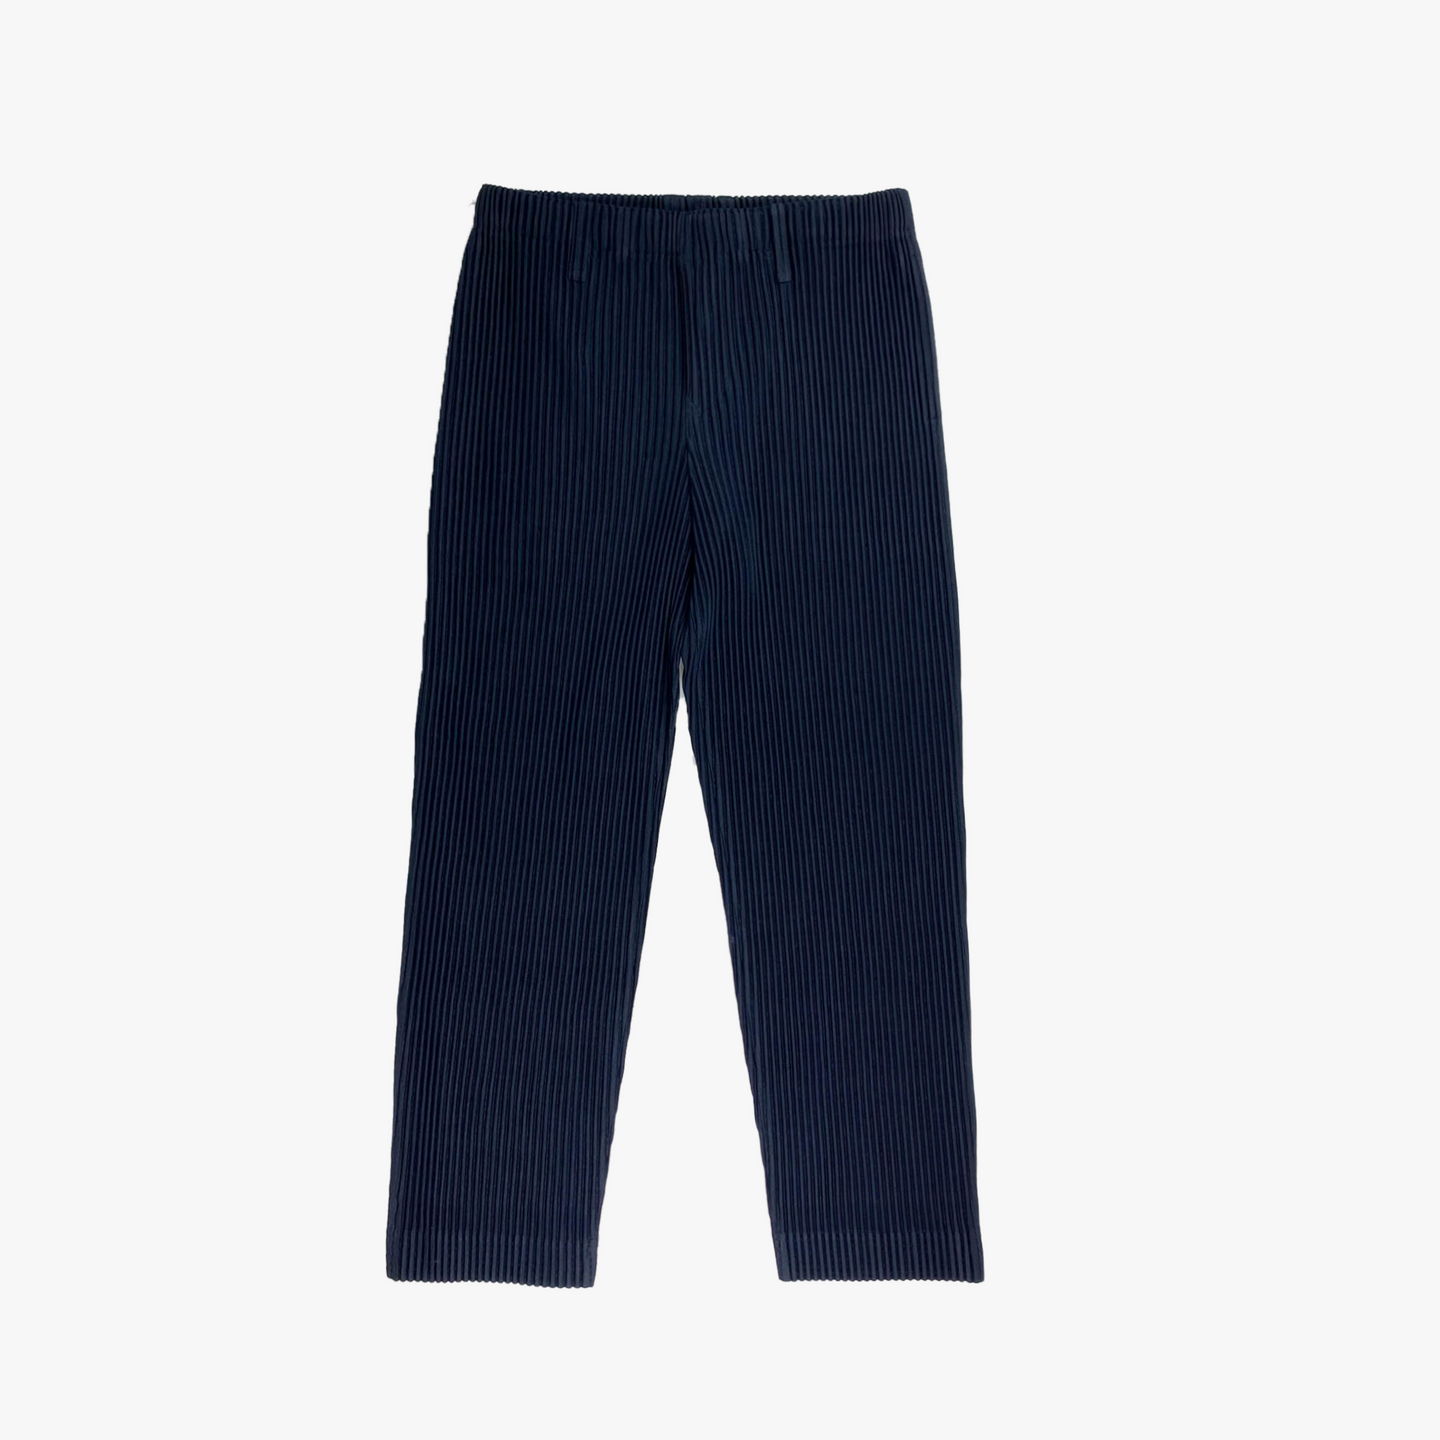 Navy Pleated Regular Fit Trousers